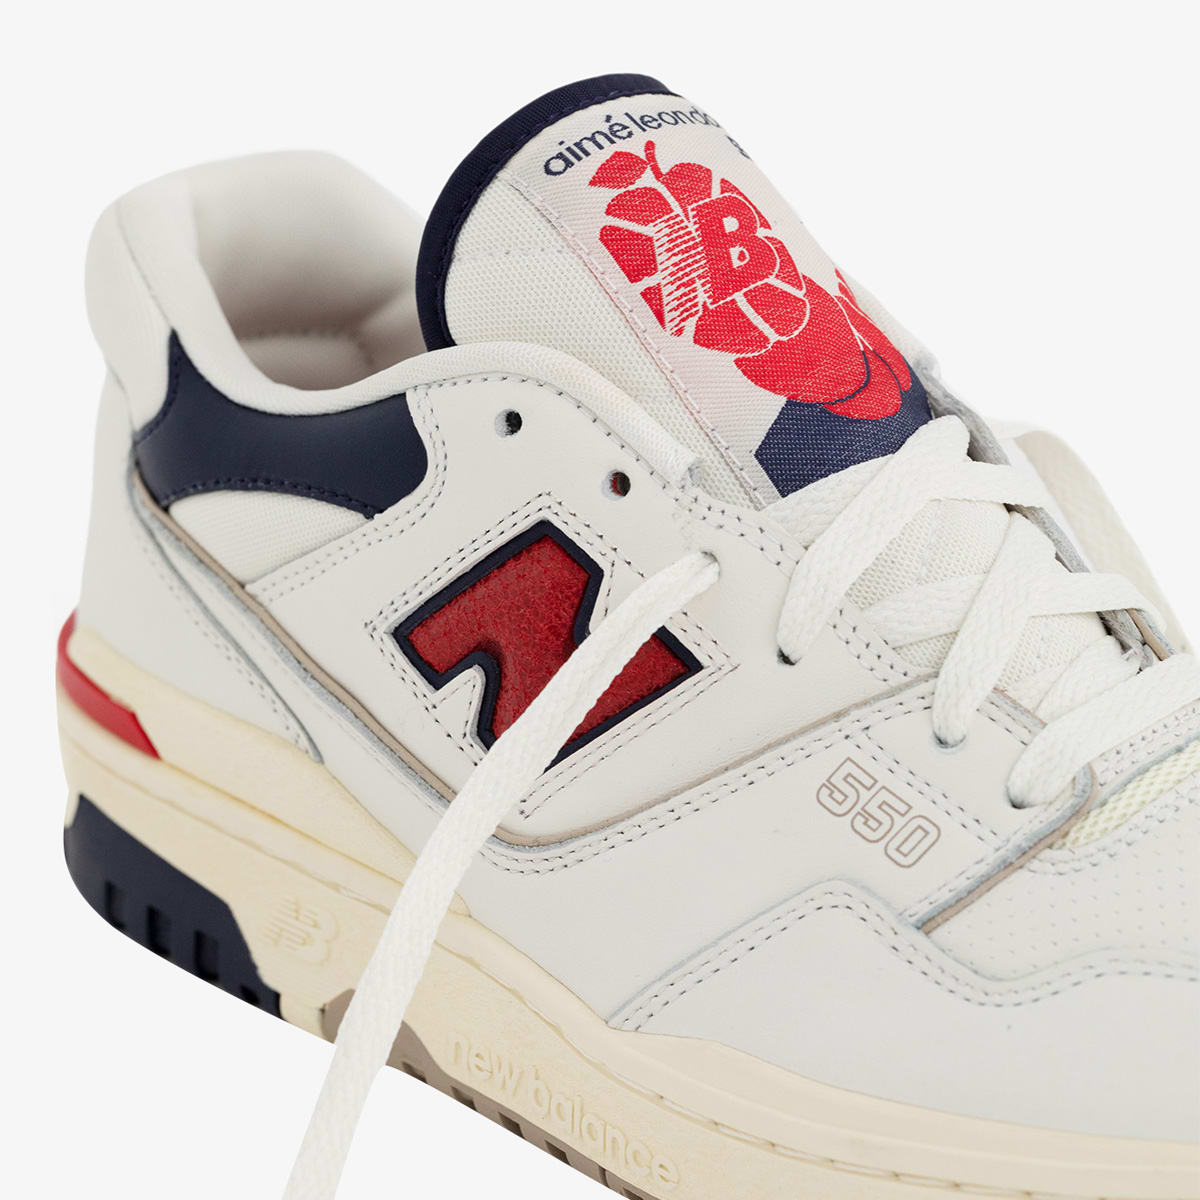 No. Aime Leon Dore & New Balance Did Not Copy Louis Vuitton Or AVIA. Get  The Low Down On The New Balance Aime Leon Dore x New Balance 550 Collab For  2020